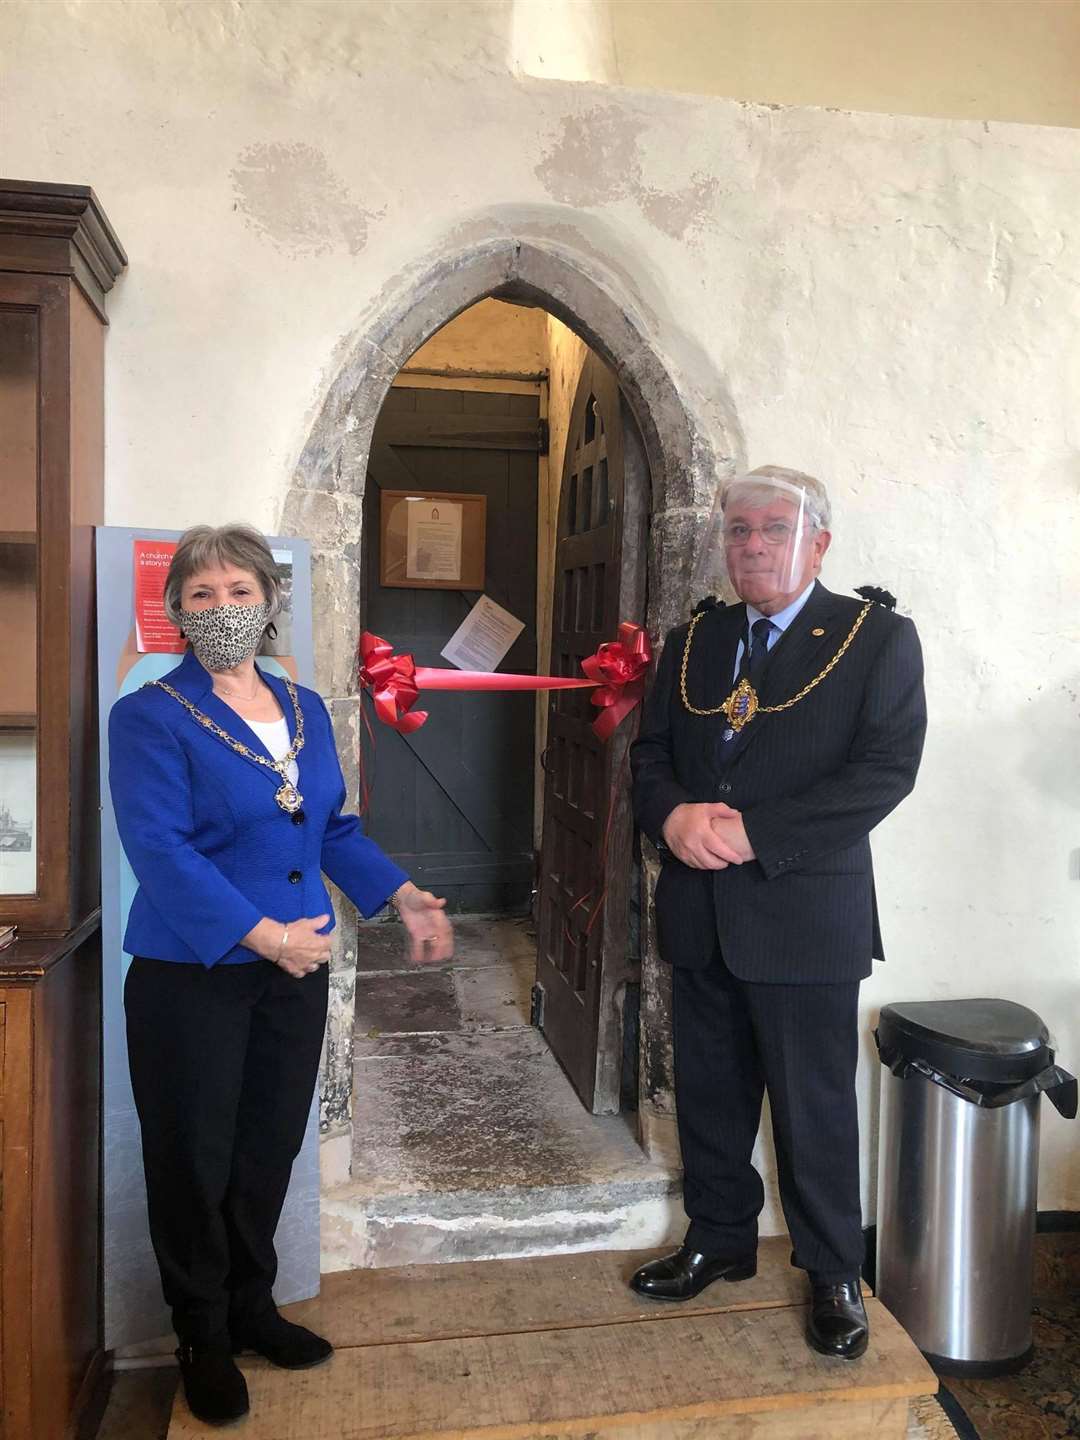 The mayor of Sandwich Cllr Paul Graeme with mayoress wife Sue re-opening the attraction